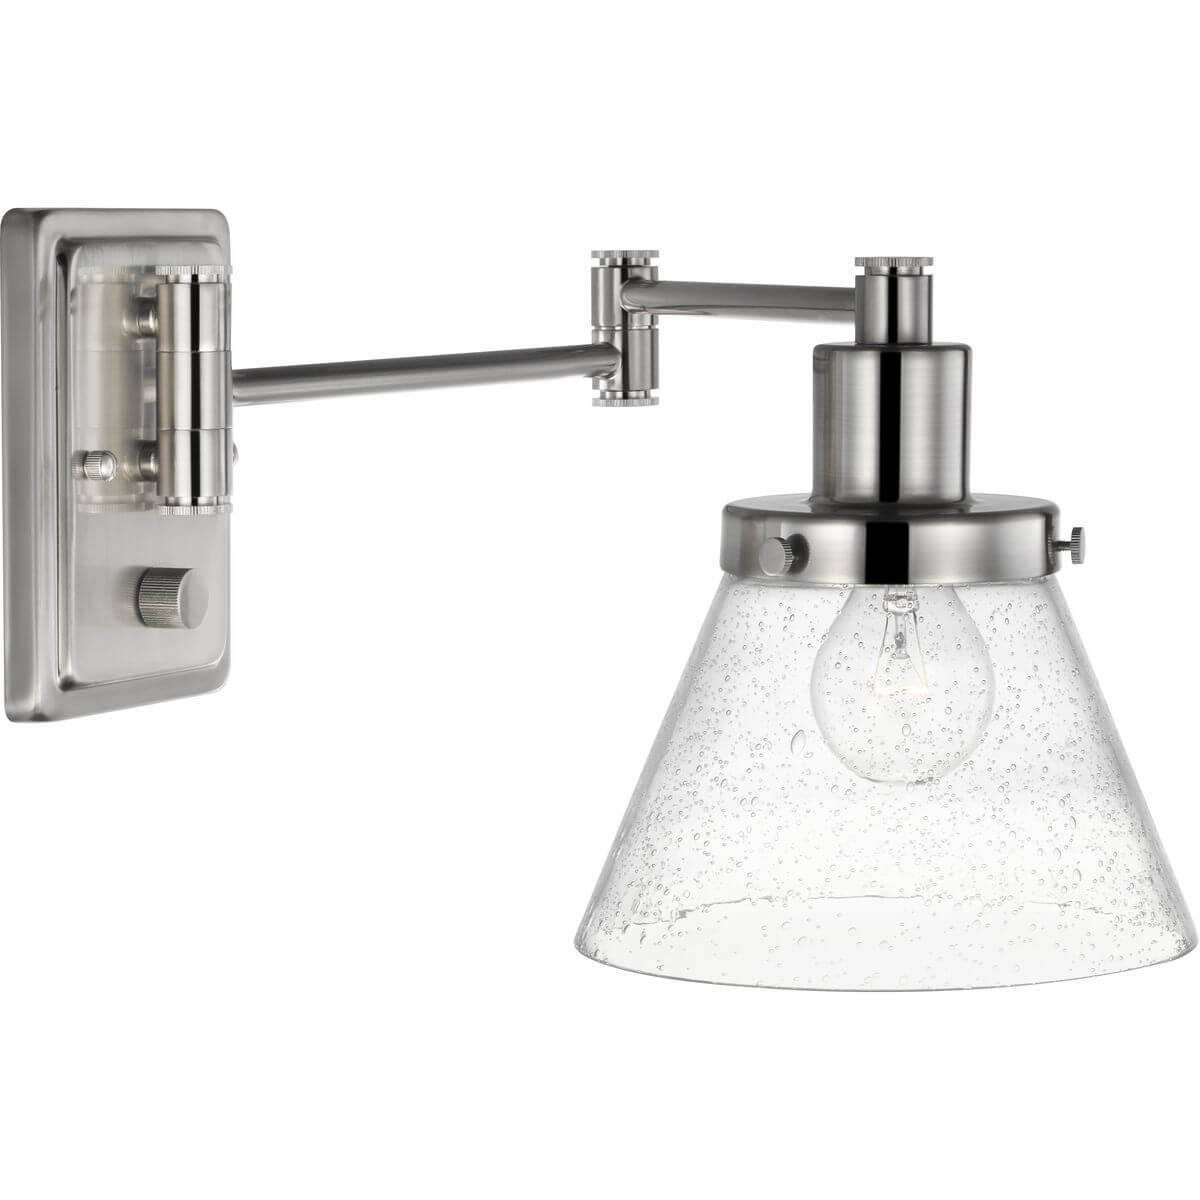 Progress Lighting Hinton 1 Light 10 inch Tall Swing Arm Wall Light in Brushed Nickel with Clear Seeded Glass P710084-009